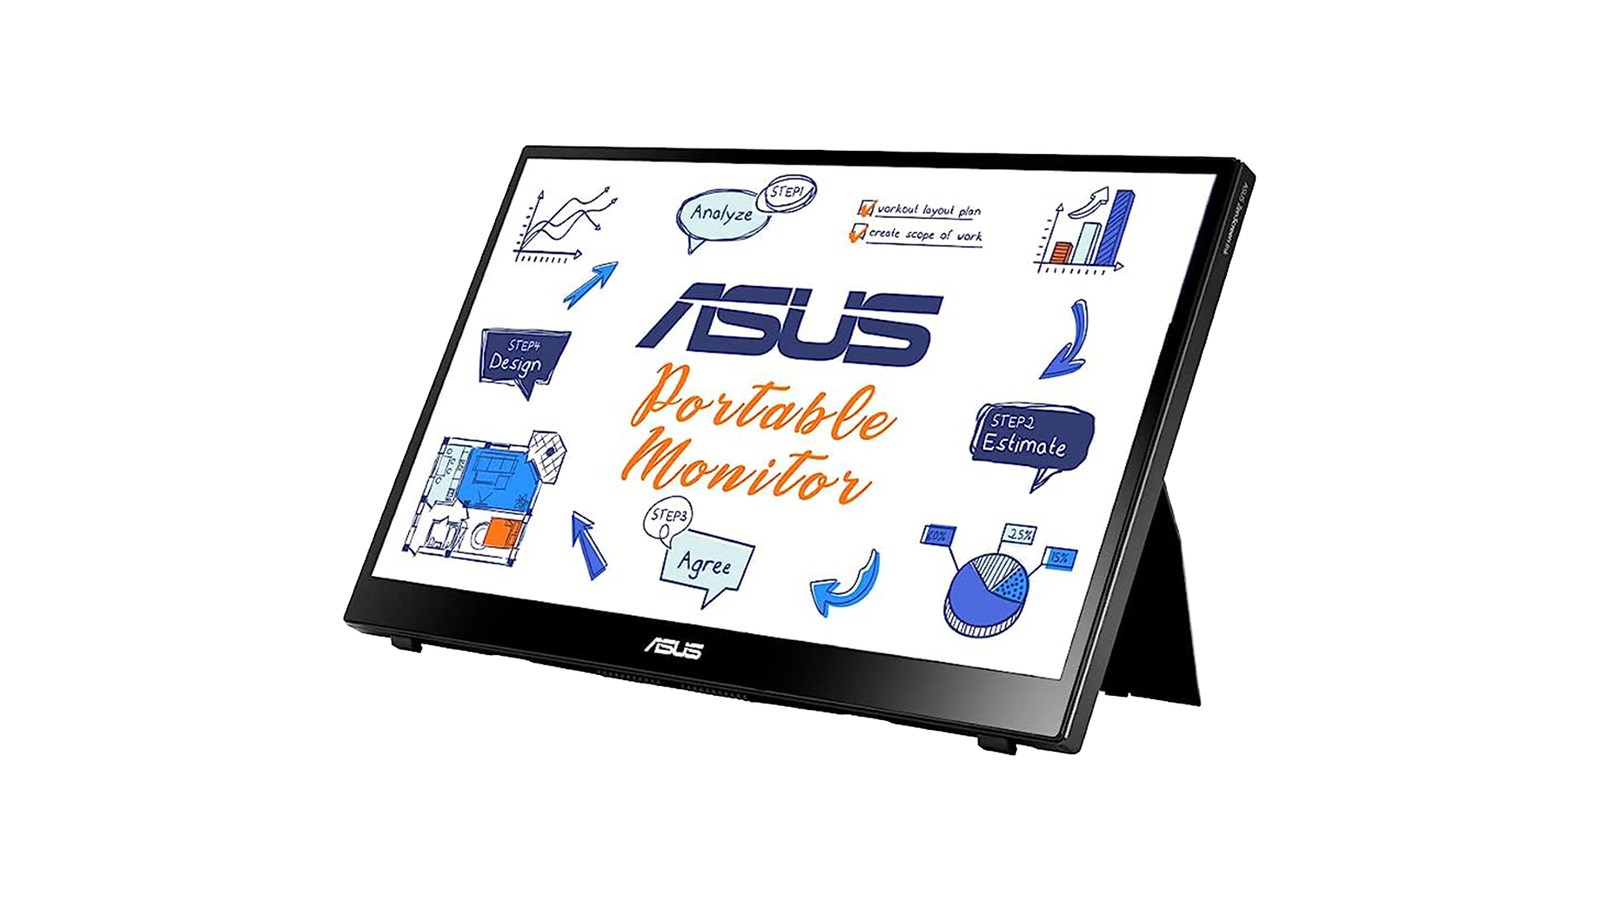 ASUS MB14AHD - Best touchscreen monitor for stylus